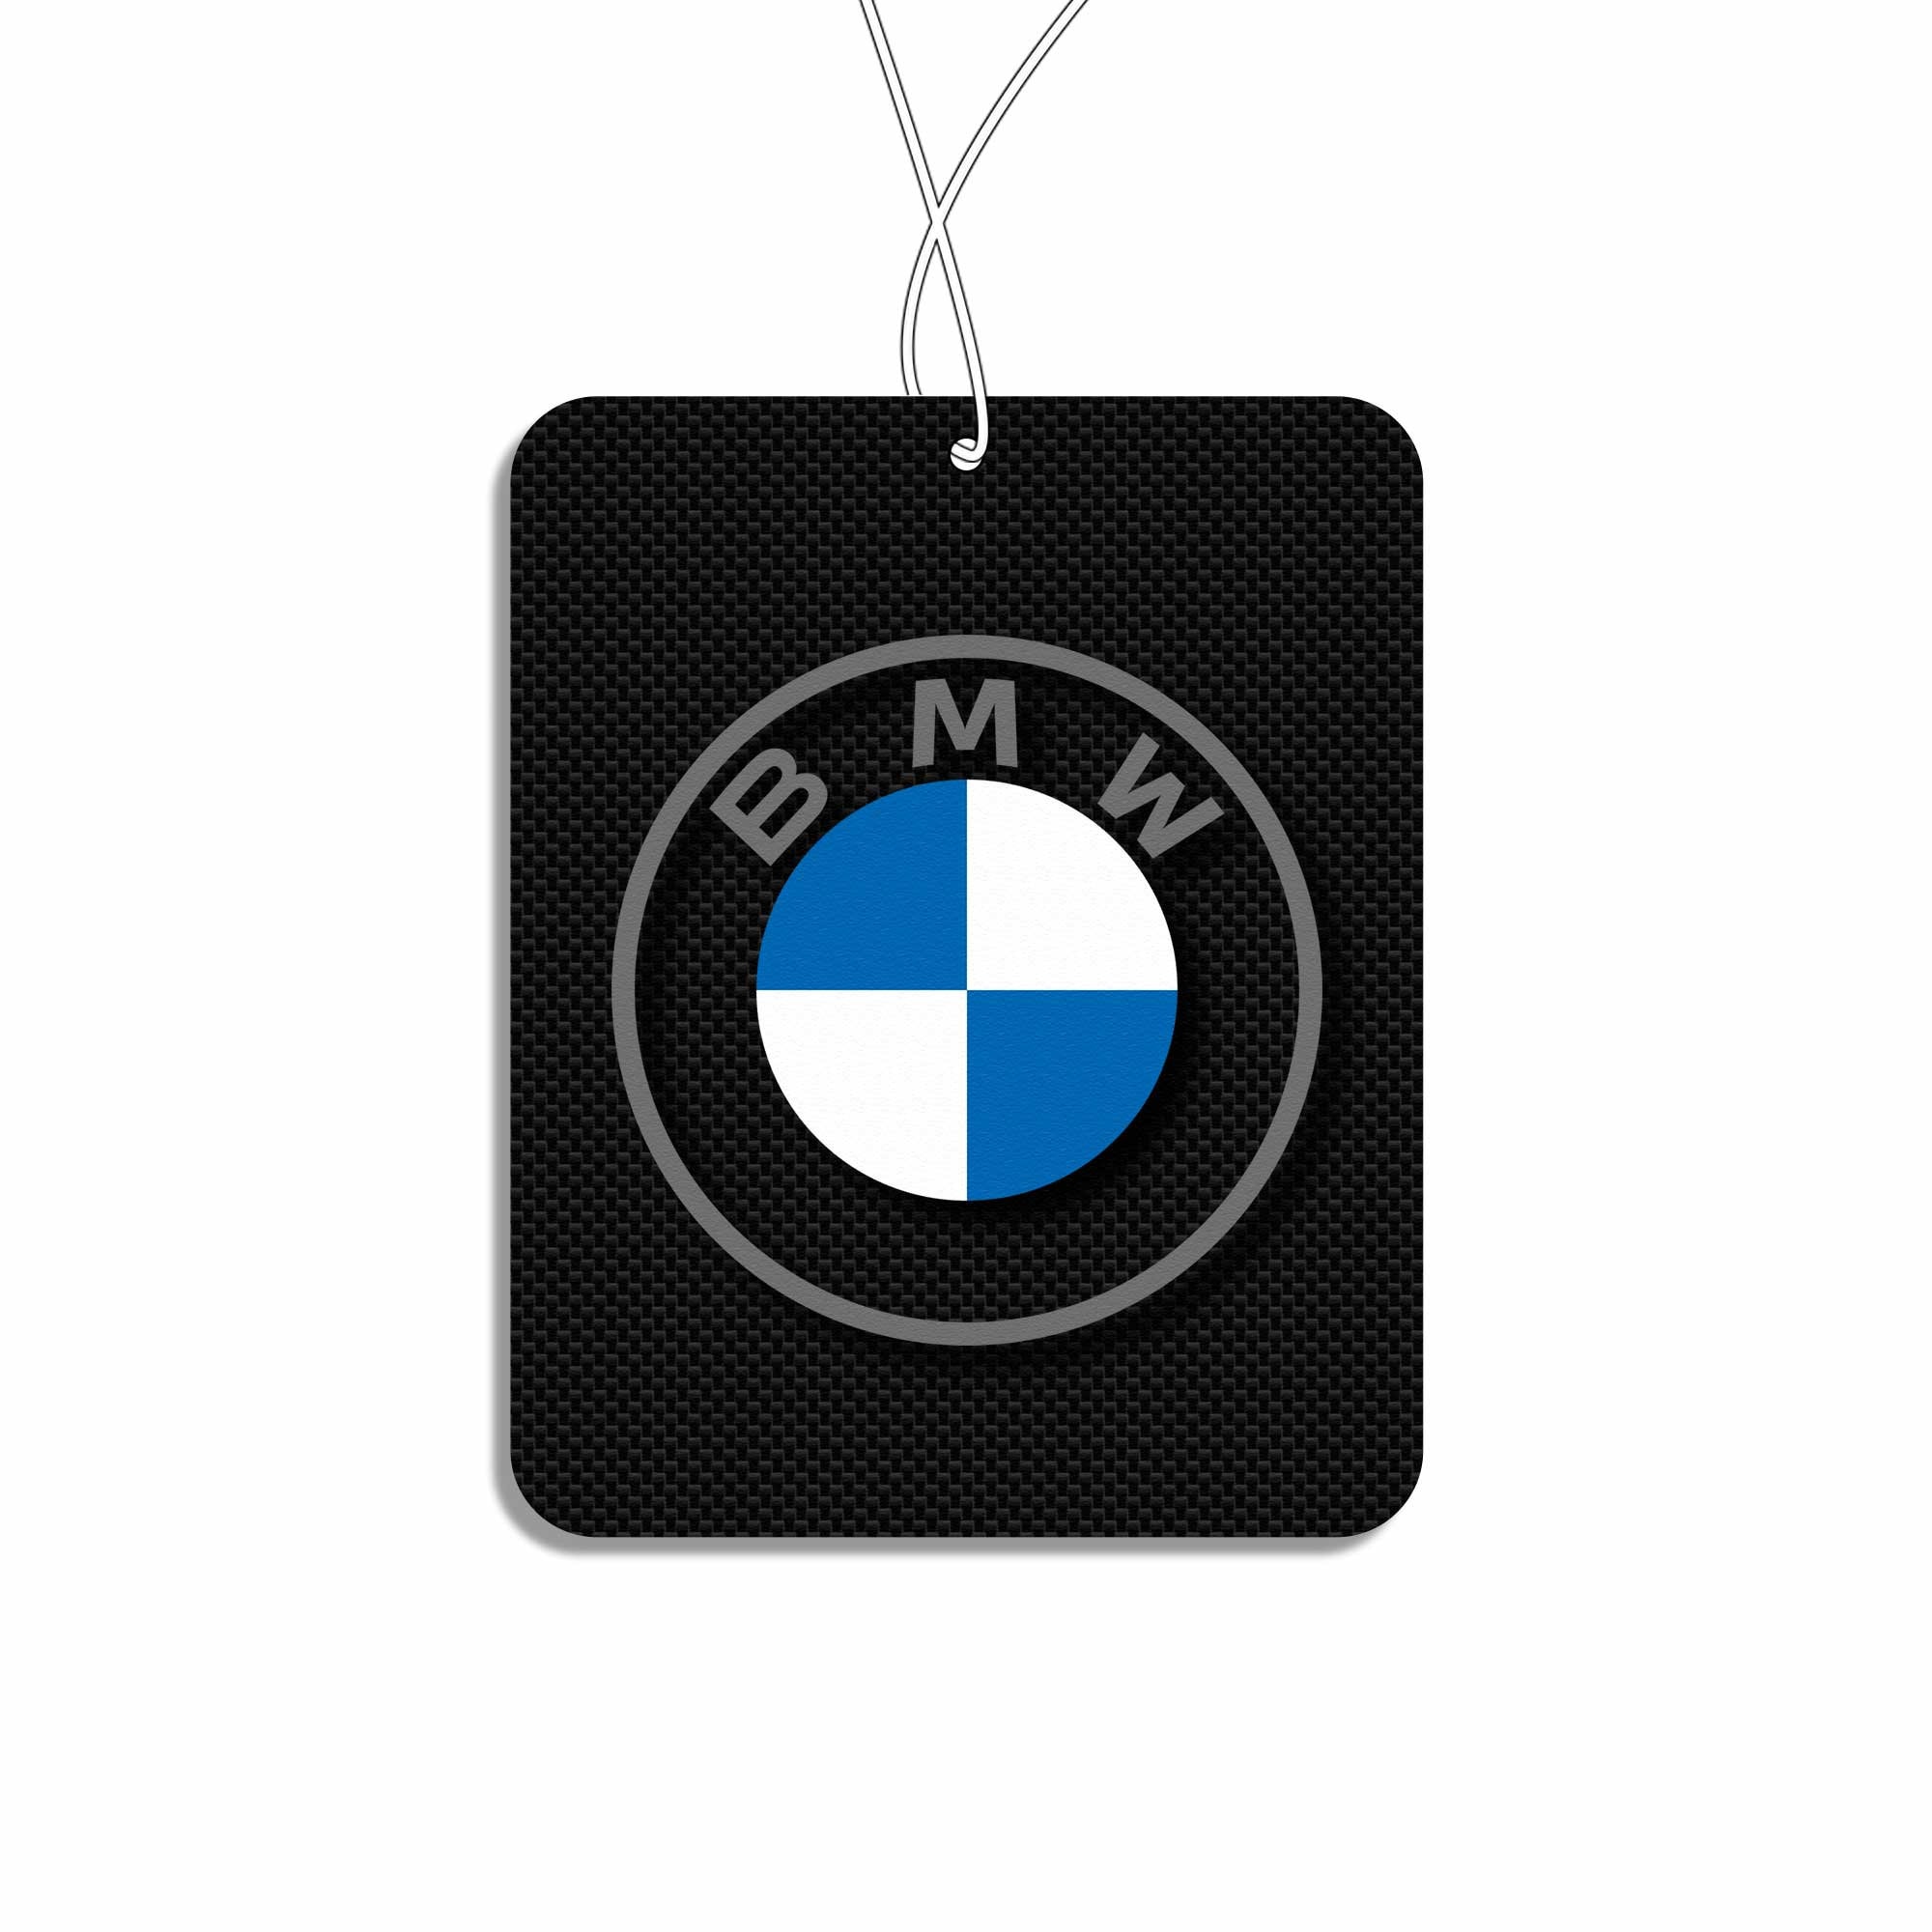 How Long BMW Air freshener Can Last? 